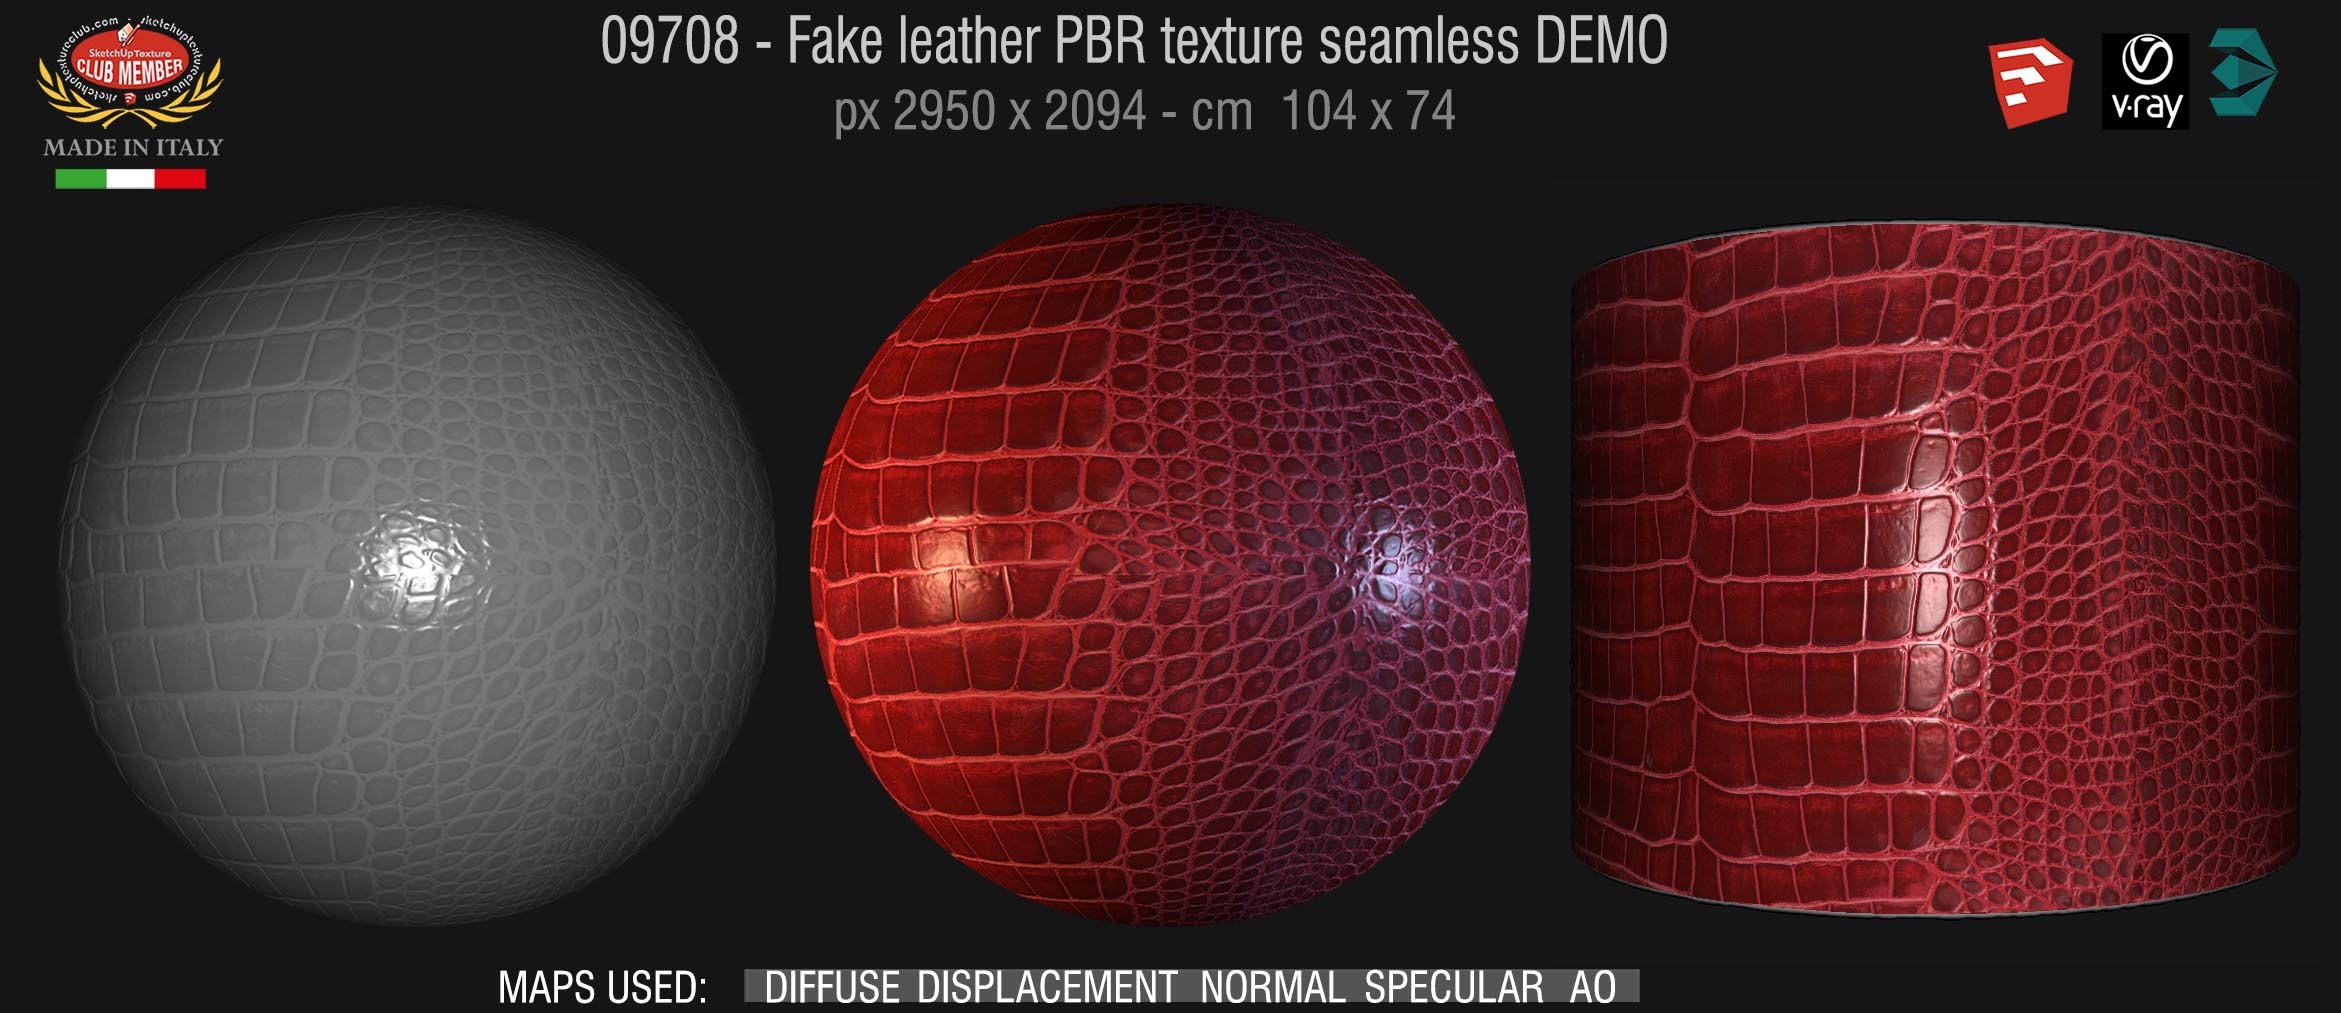 09708 fake leather PBR texture seamless DEMO